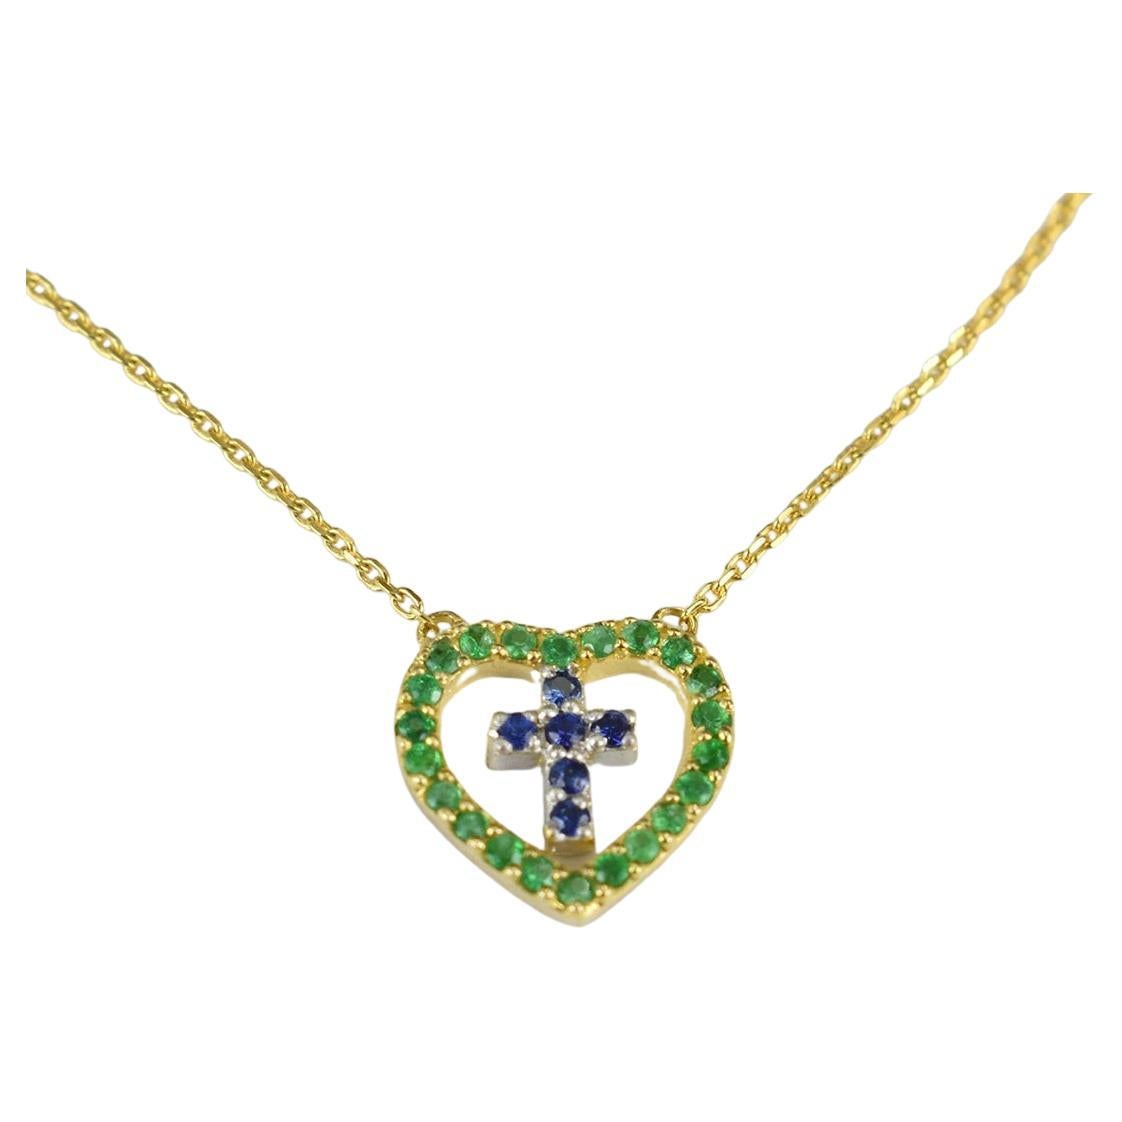 Genuine Emerald and Blue Sapphire Necklace is made of 14k solid gold.
Available in three colors of gold: White Gold / Rose Gold / Yellow Gold.

Beautiful little minimalist gold necklace is adorned with natural AAA quality Blue Sapphire and Emerald